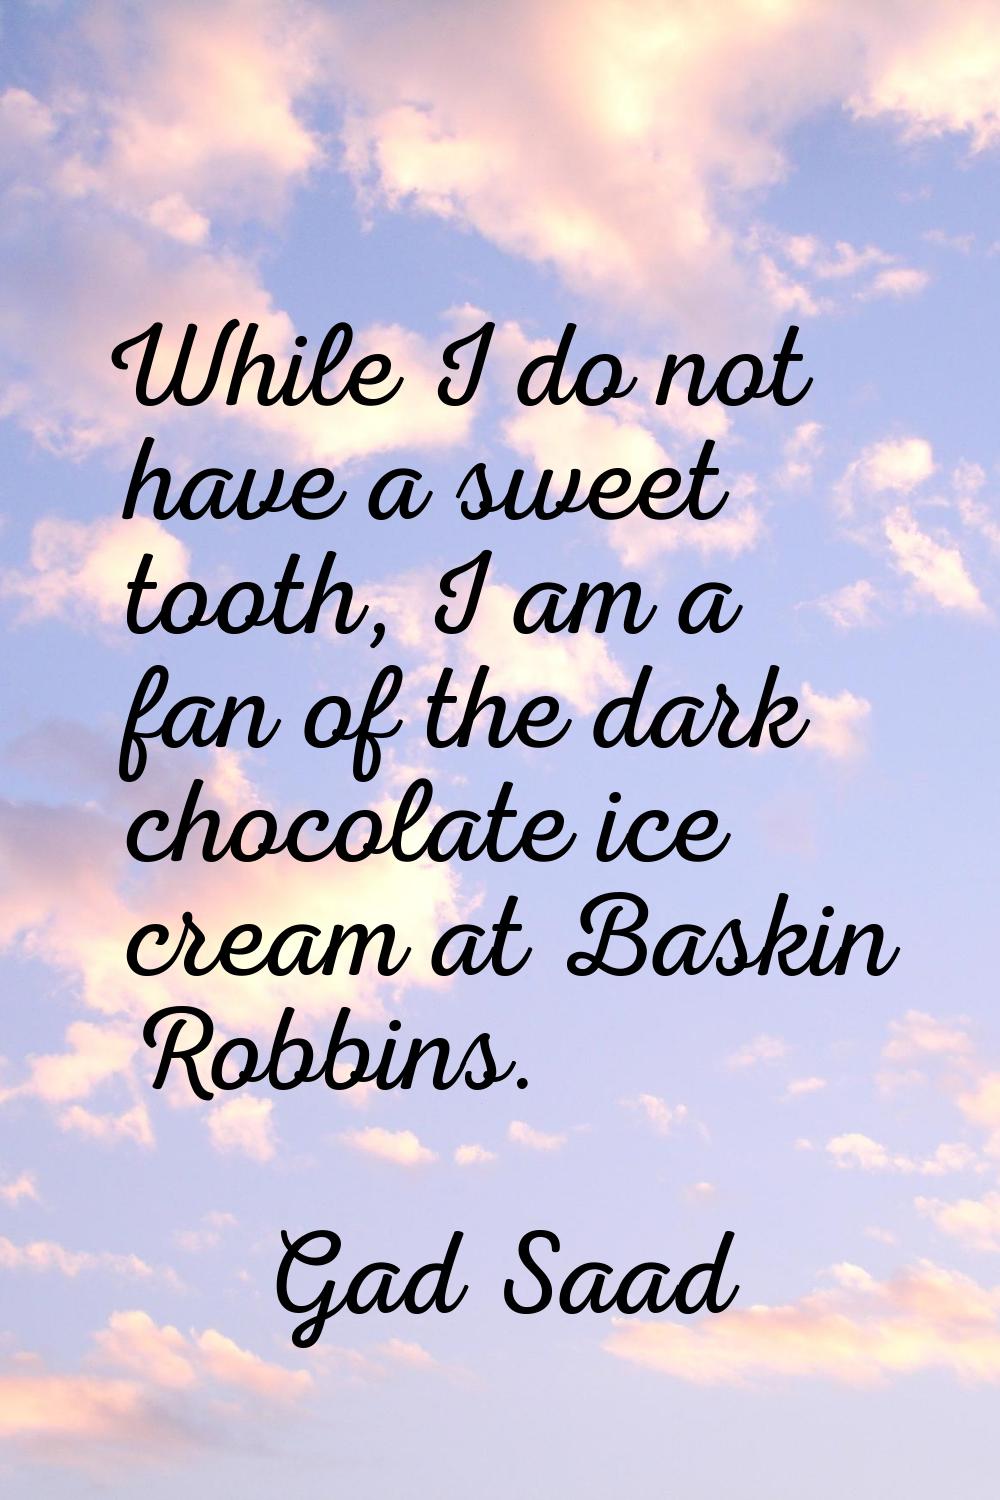 While I do not have a sweet tooth, I am a fan of the dark chocolate ice cream at Baskin Robbins.